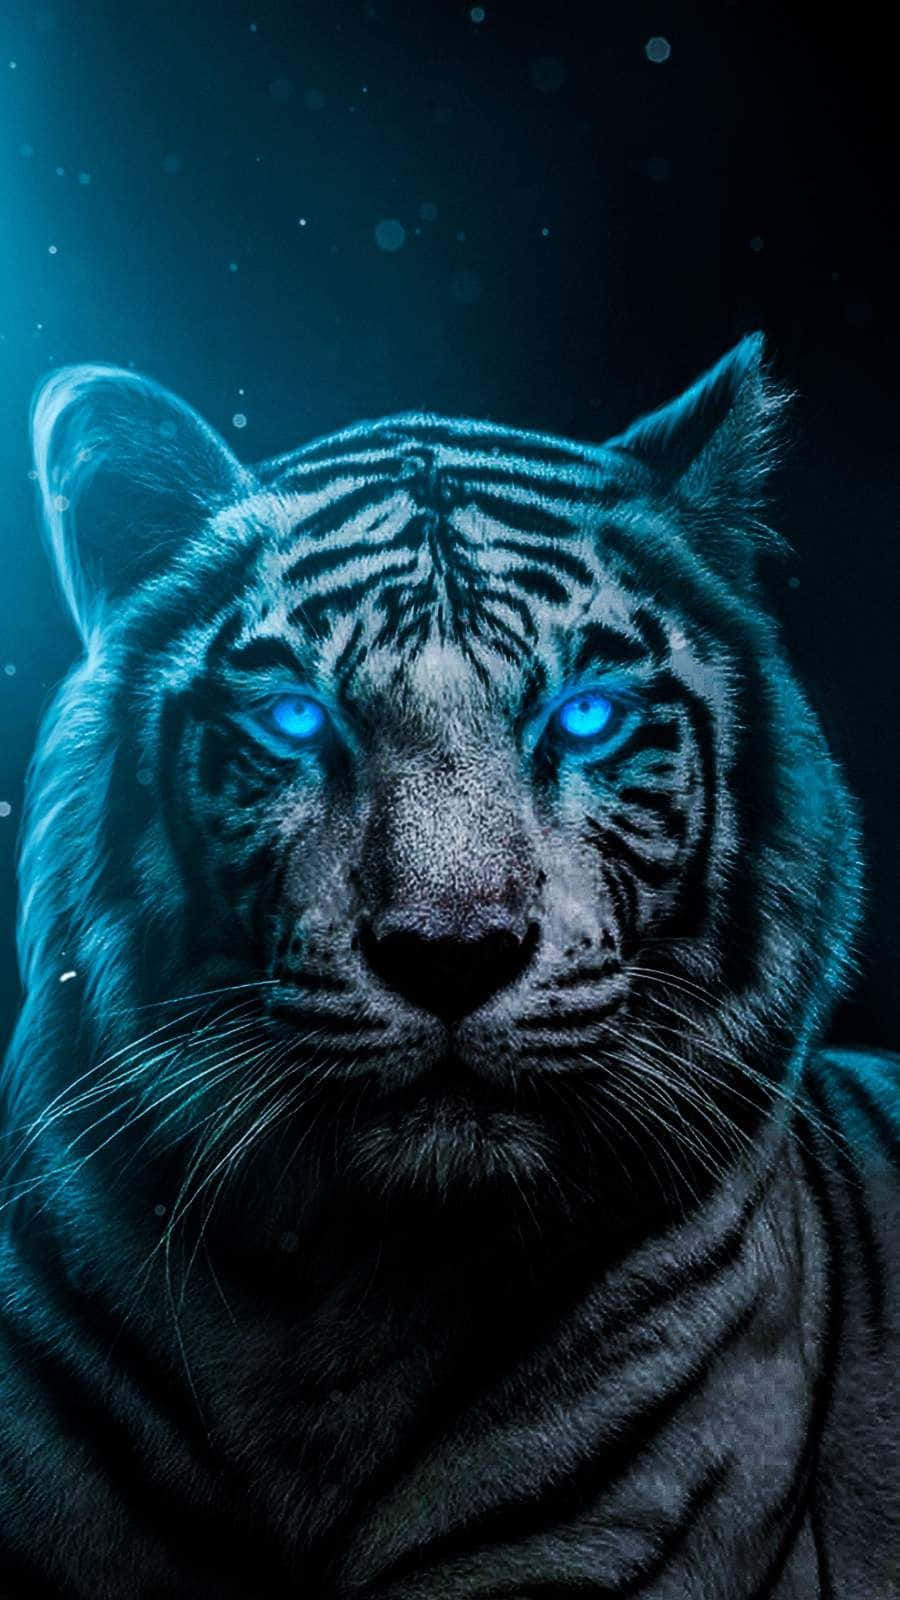 white tiger with blue eyes